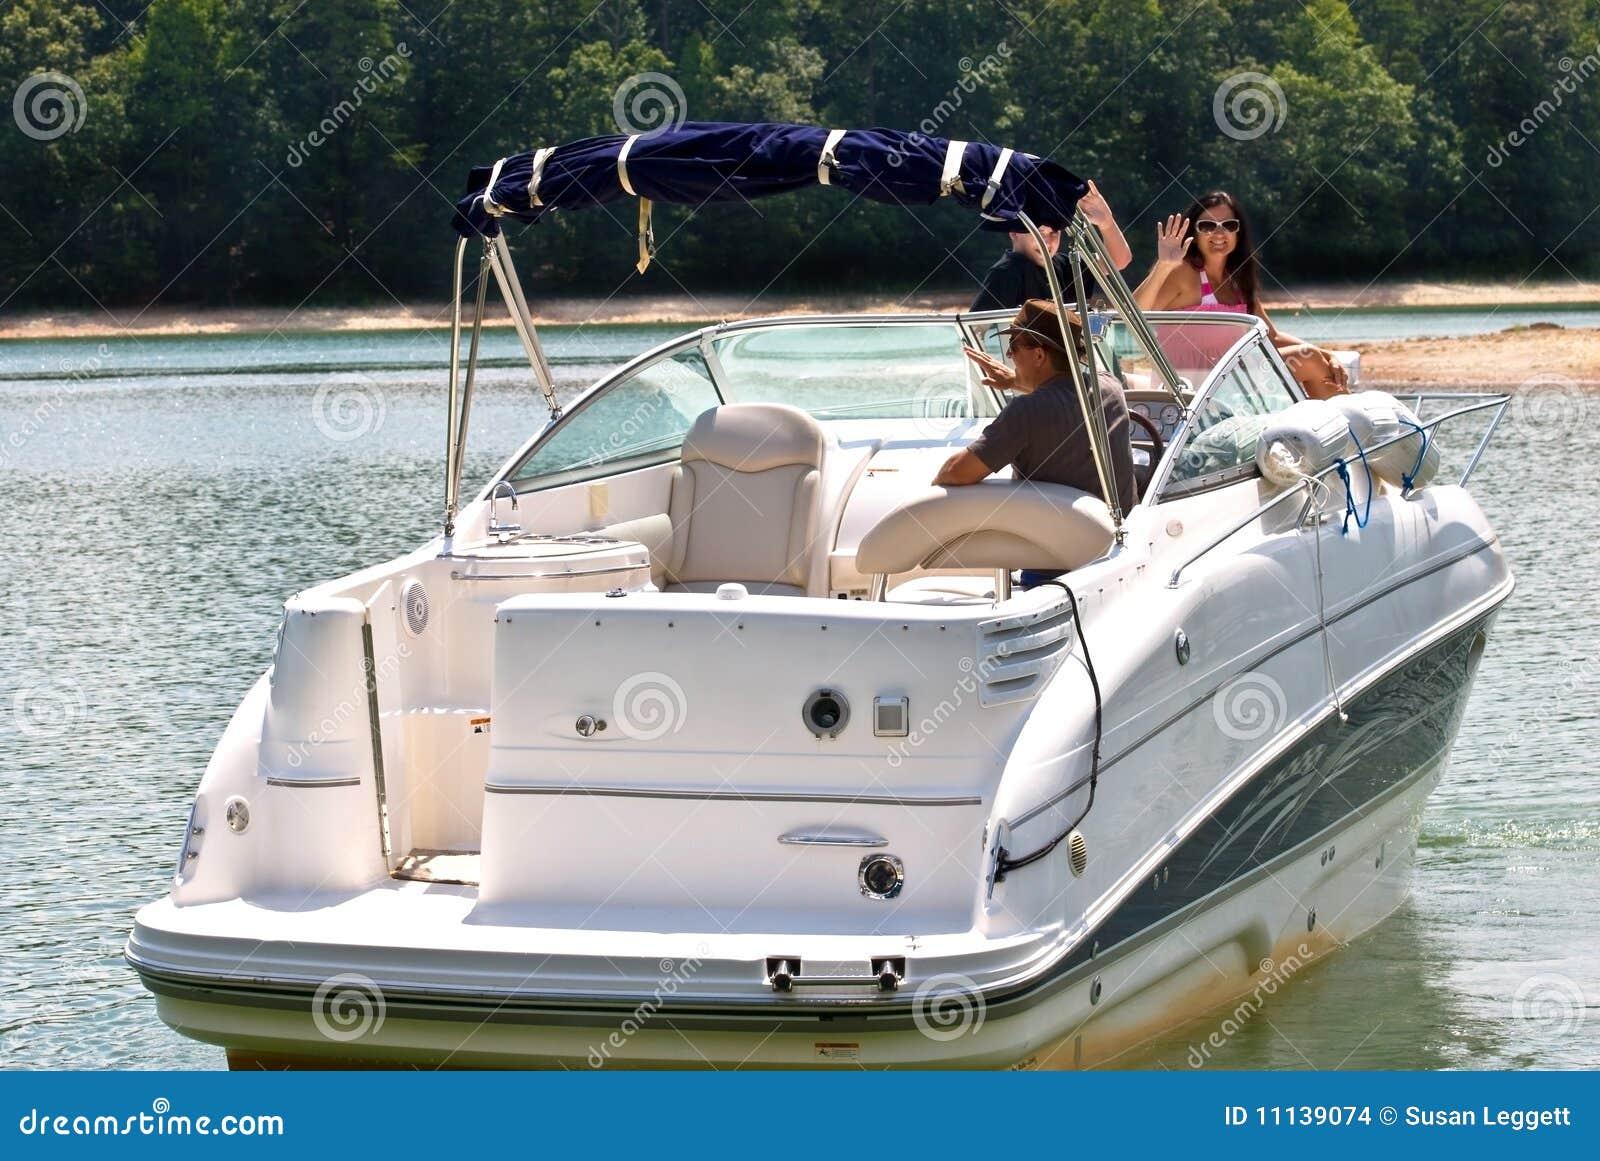 Happy Family On Large Boat Stock Images - Image: 11139074